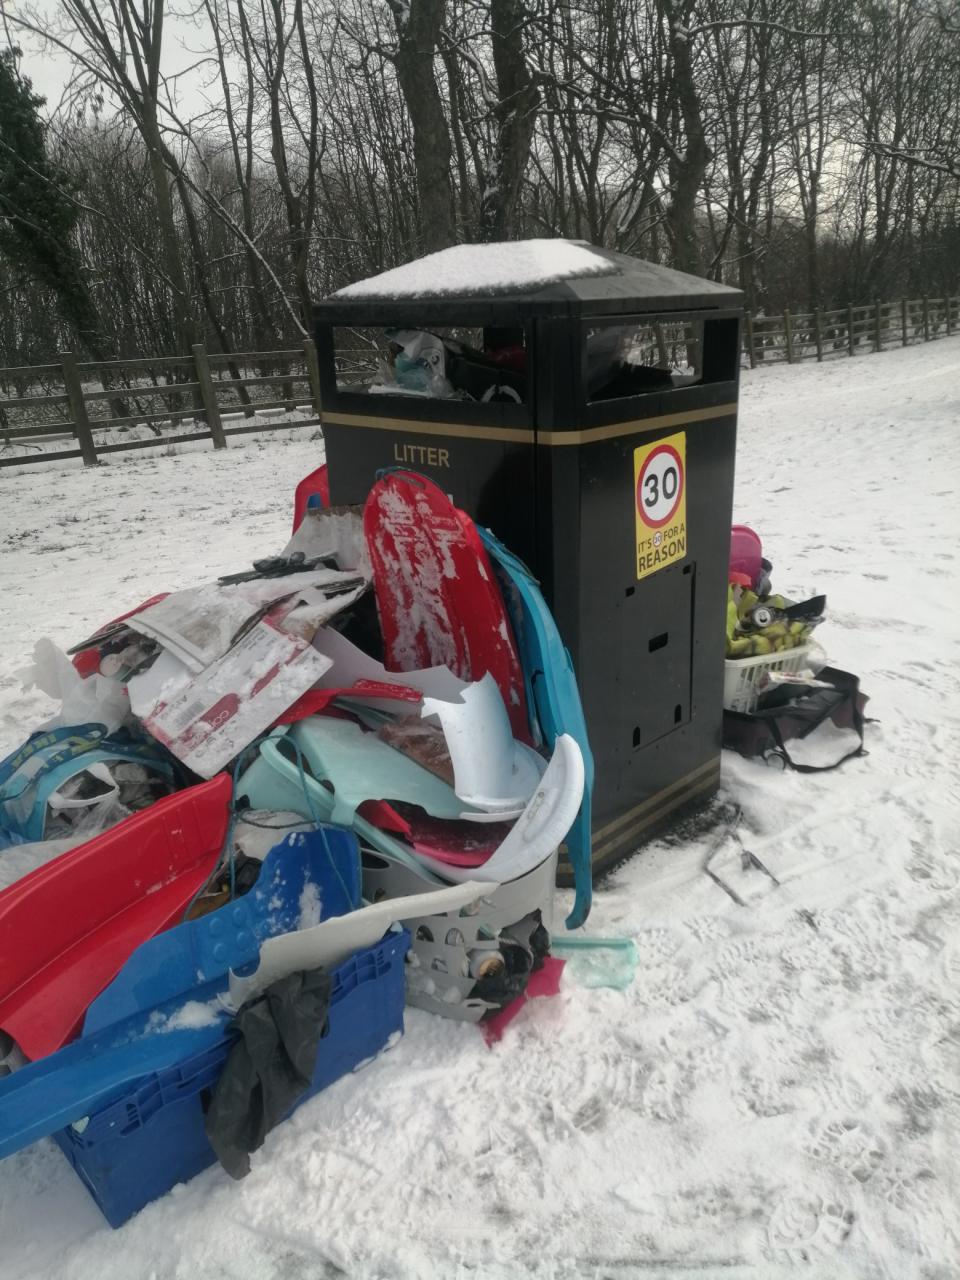 Twitter user DianeJojo10 posted a picture of a bin on the Moor saying 